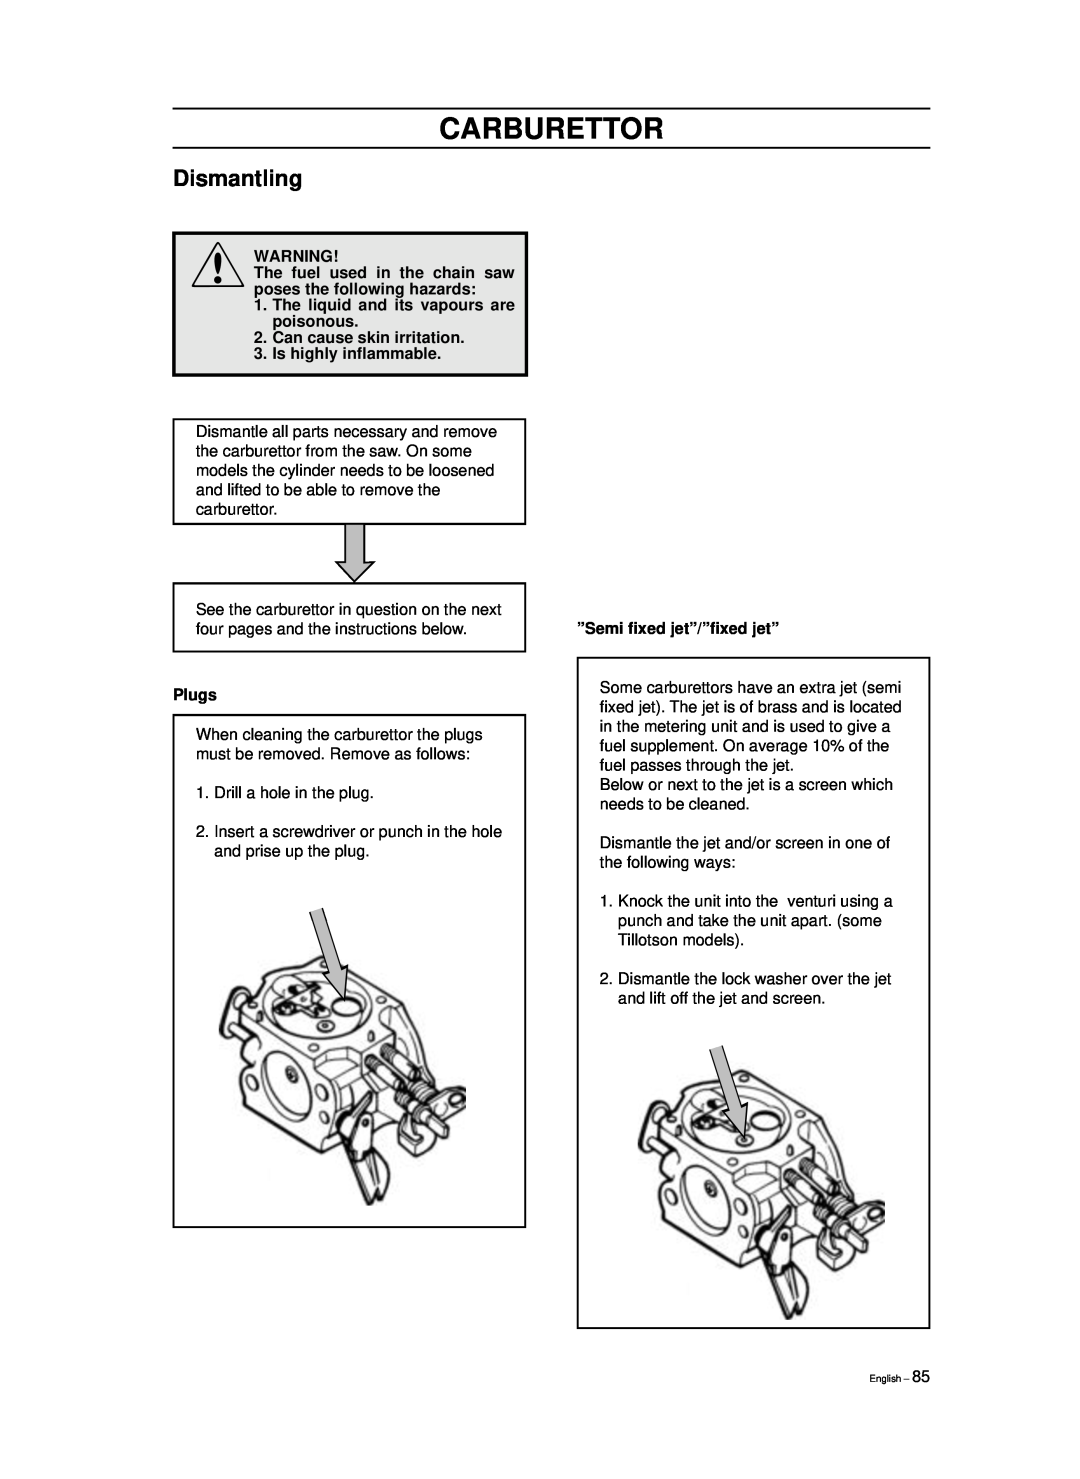 Husqvarna 965030296, 965030298 Carburettor, Dismantling, The fuel used in the chain saw poses the following hazards, Plugs 